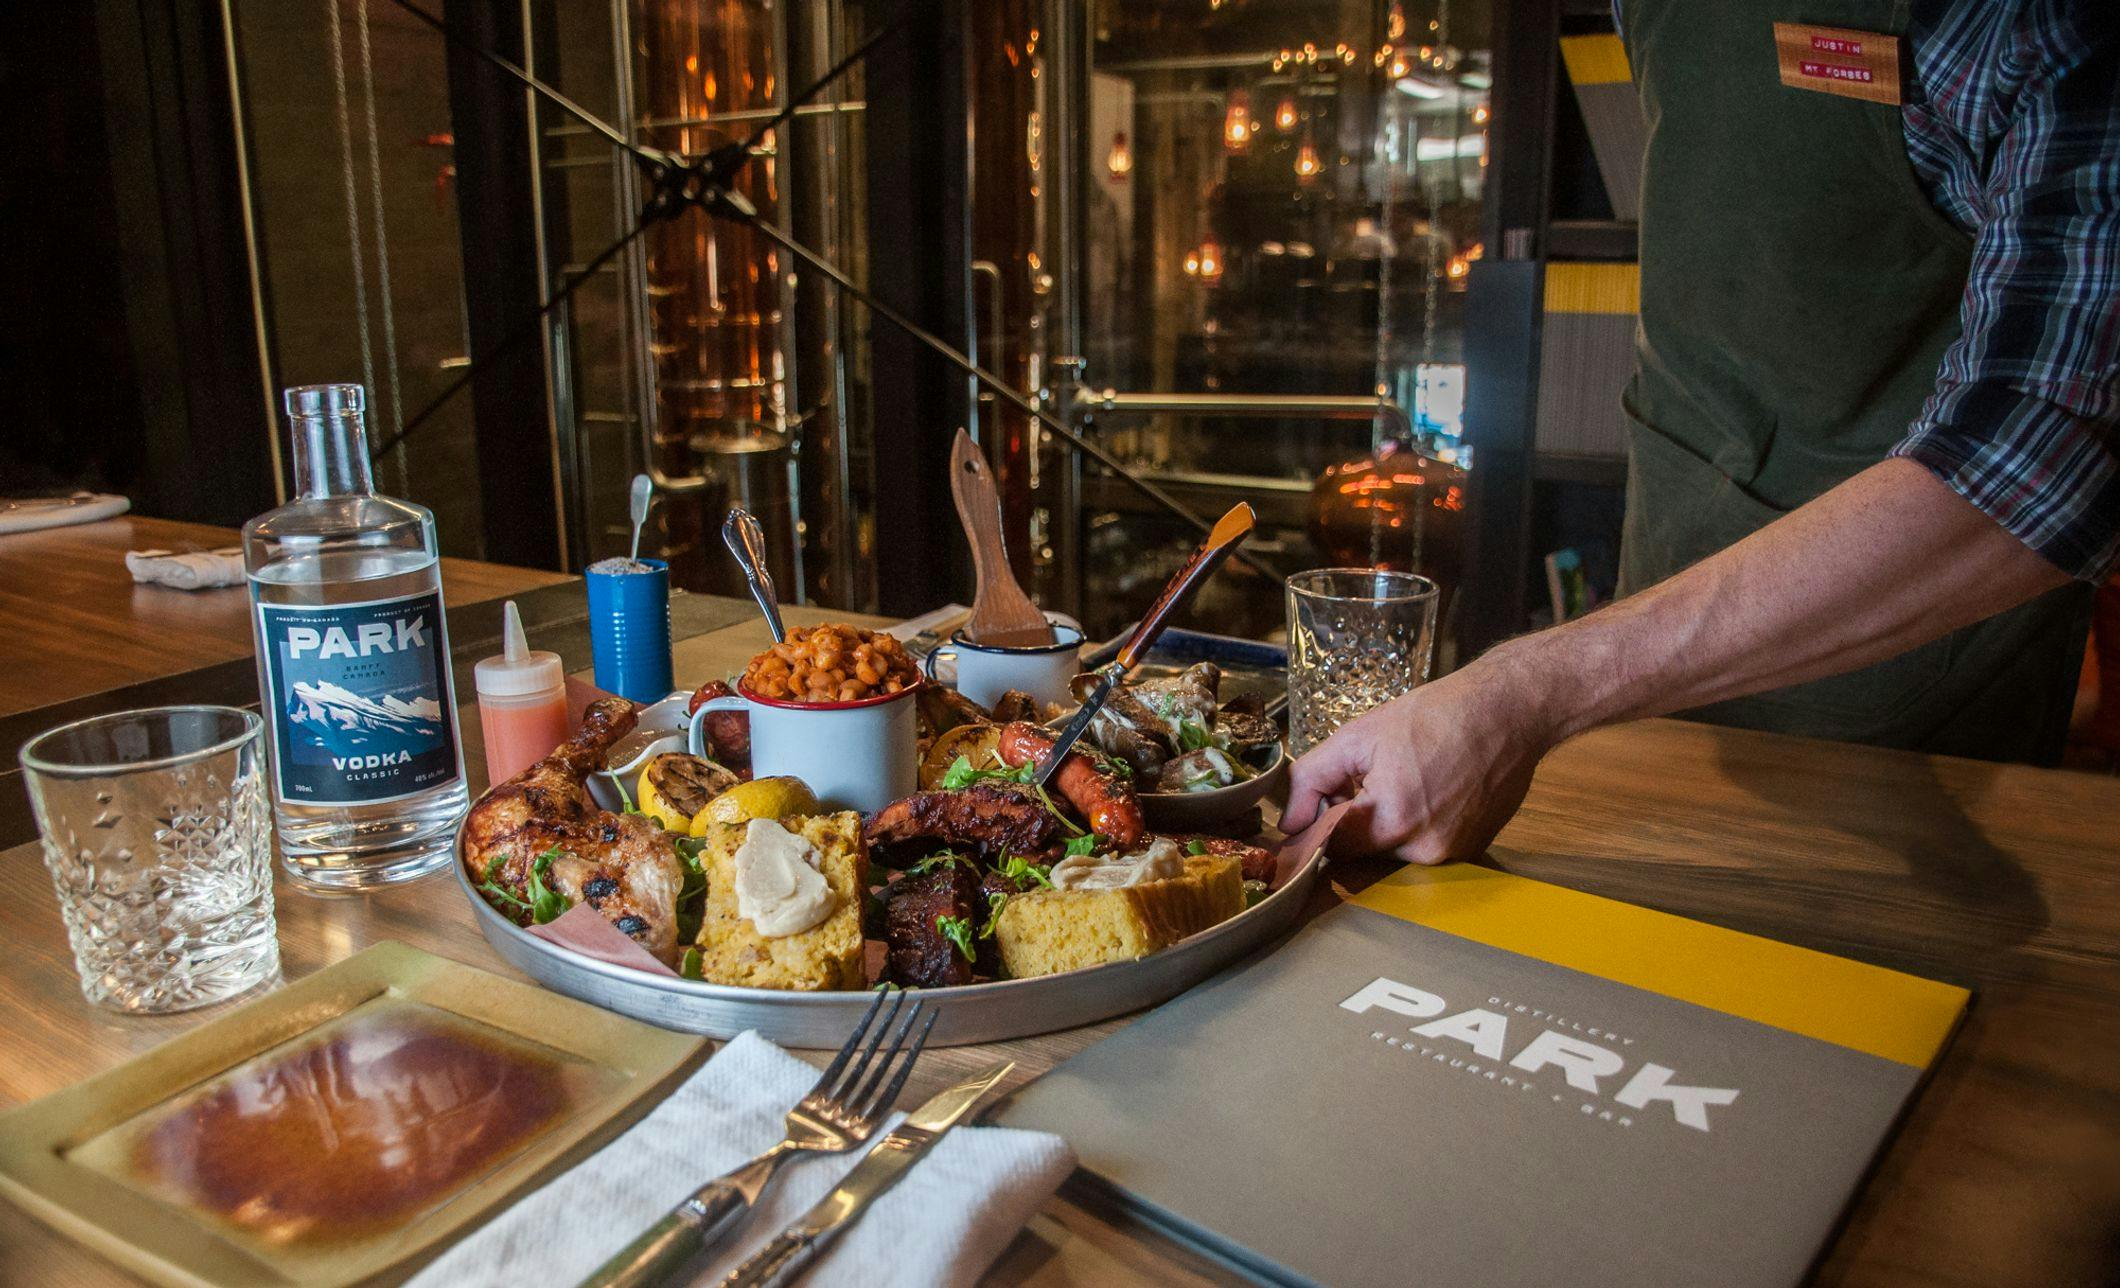 A server lays down a large sharing plat of food with a bottle of vodka and the distillery in the background